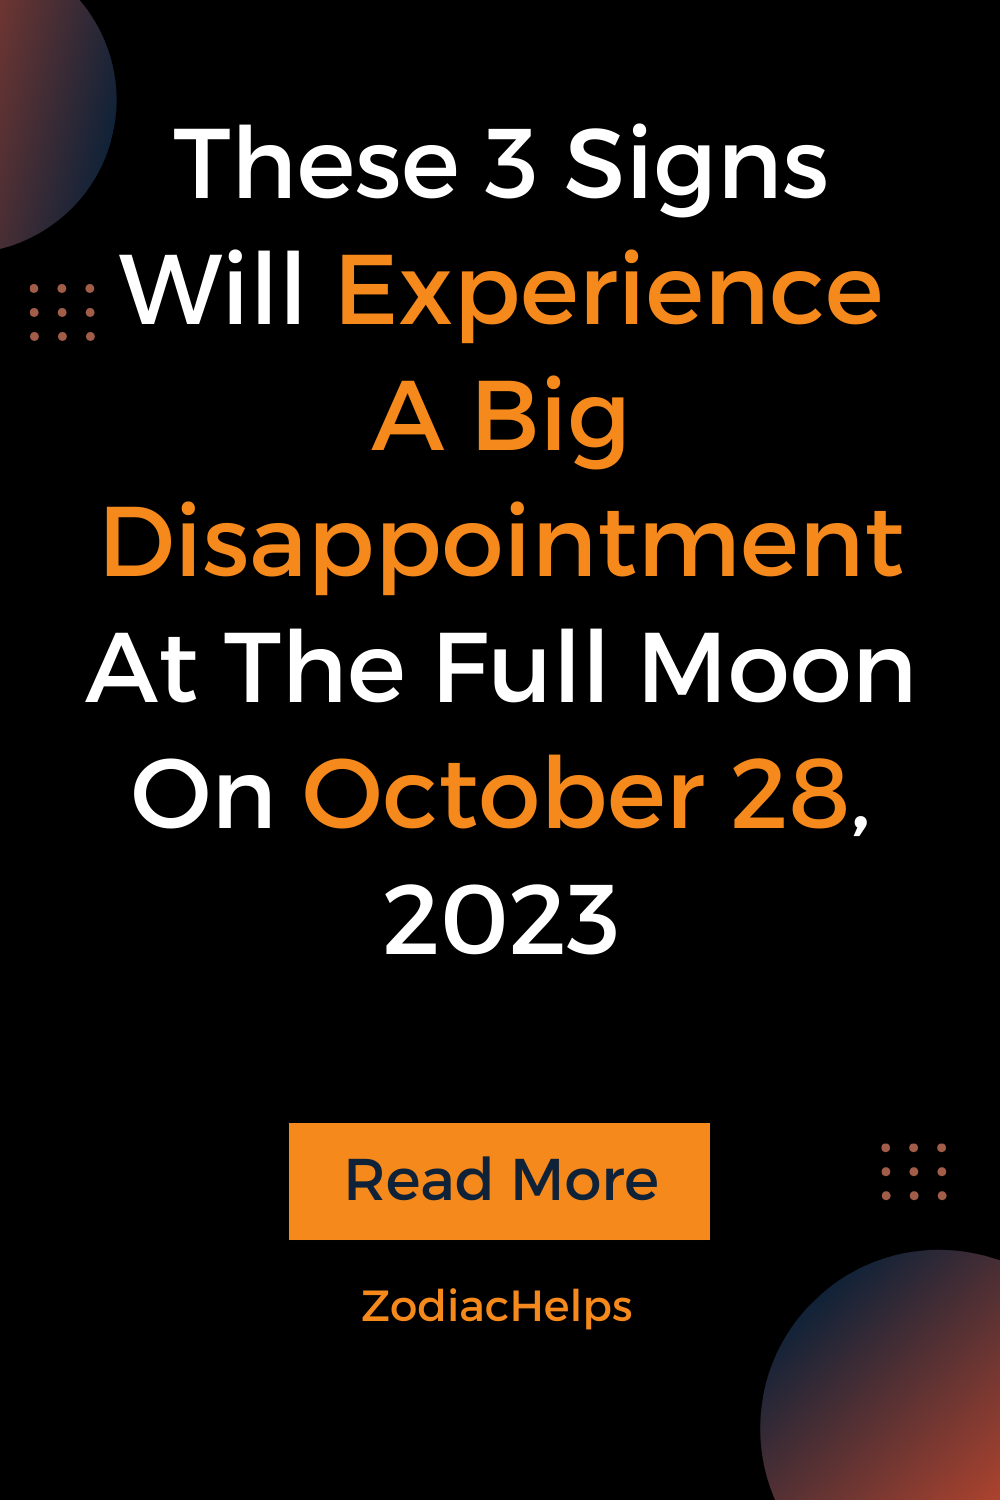 These 3 Signs Will Experience A Big Disappointment At The Full Moon On October 28, 2023